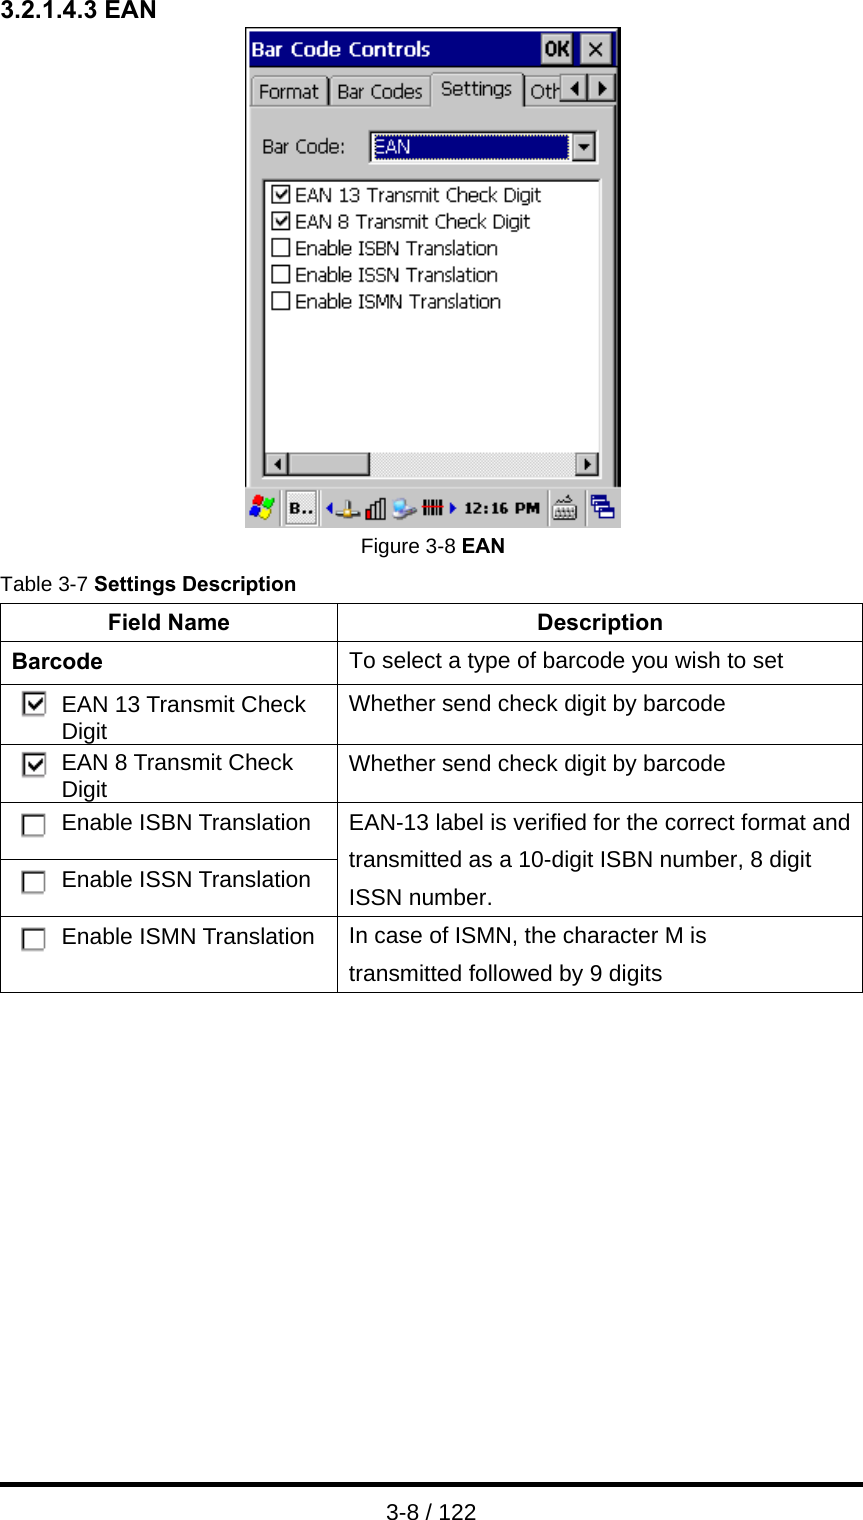  3-8 / 122 3.2.1.4.3 EAN  Figure 3-8 EAN Table 3-7 Settings Description Field Name  Description Barcode  To select a type of barcode you wish to set EAN 13 Transmit Check Digit  Whether send check digit by barcode EAN 8 Transmit Check Digit  Whether send check digit by barcode Enable ISBN Translation Enable ISSN Translation EAN-13 label is verified for the correct format and transmitted as a 10-digit ISBN number, 8 digit ISSN number.   Enable ISMN Translation  In case of ISMN, the character M is transmitted followed by 9 digits    